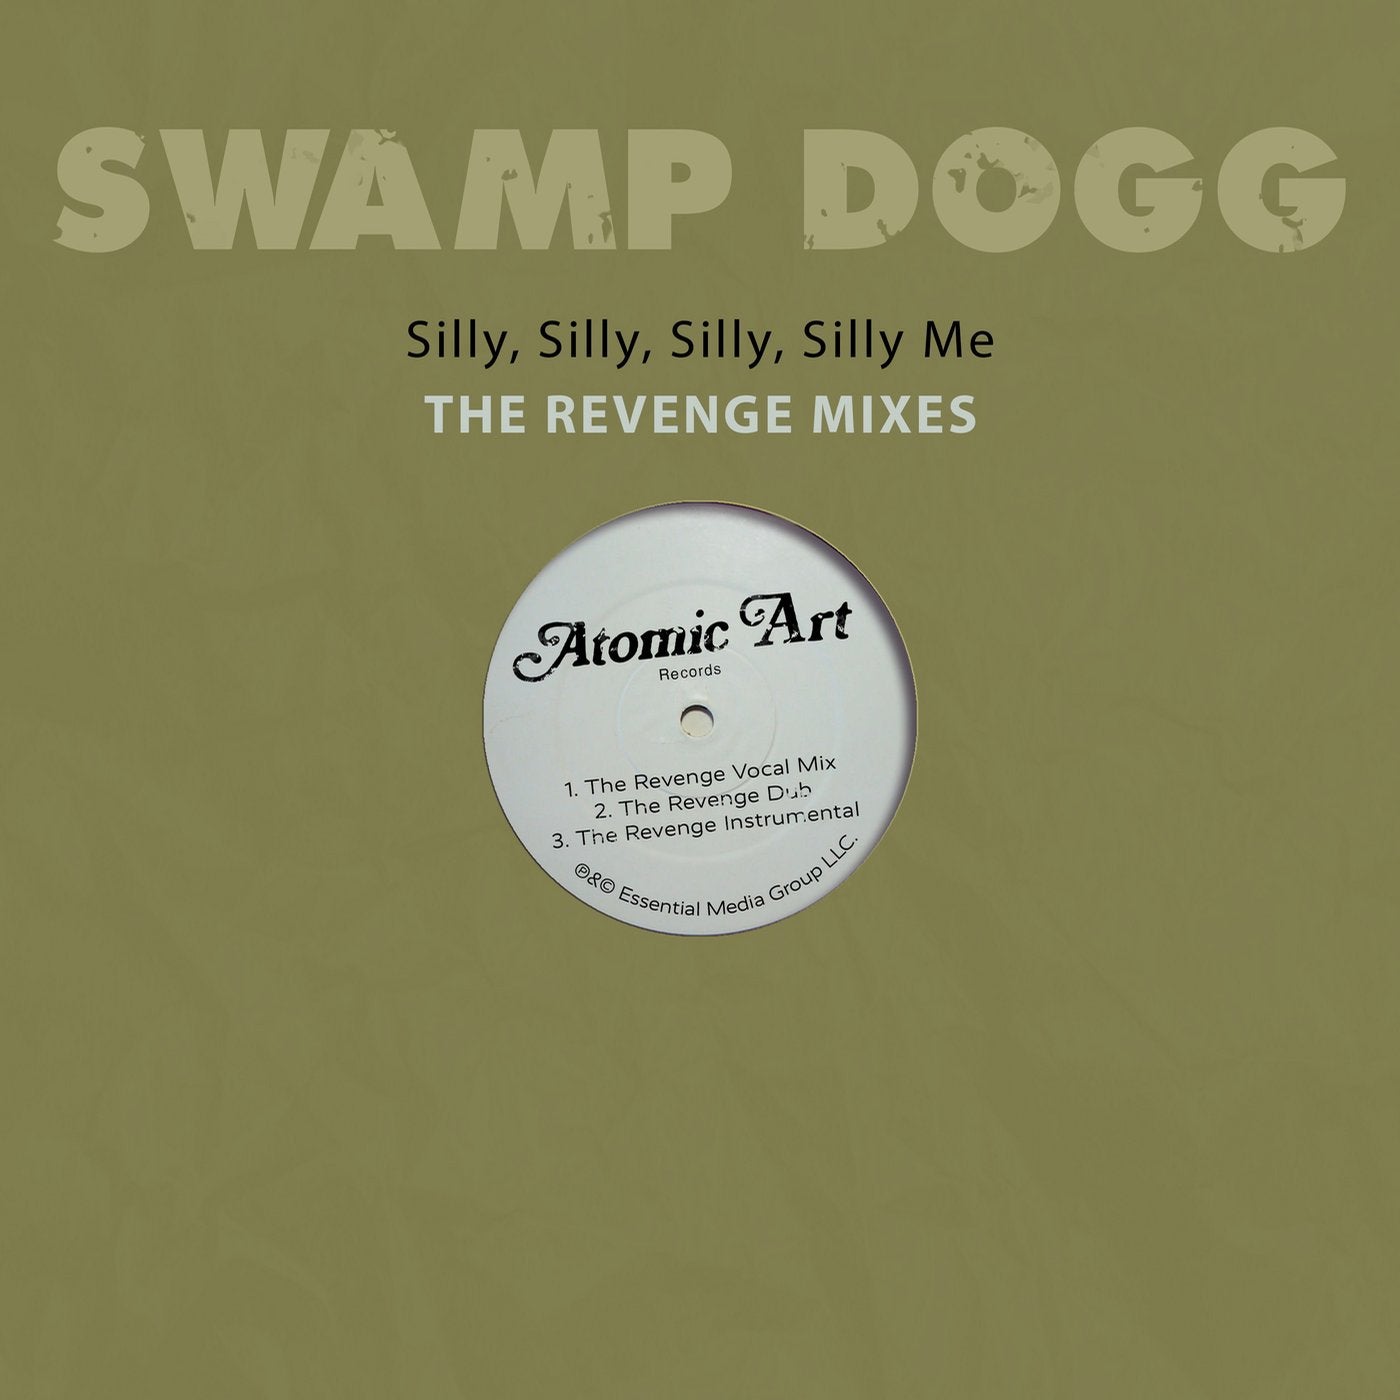 Silly, Silly, Silly, Silly Me - the Revenge Mixes